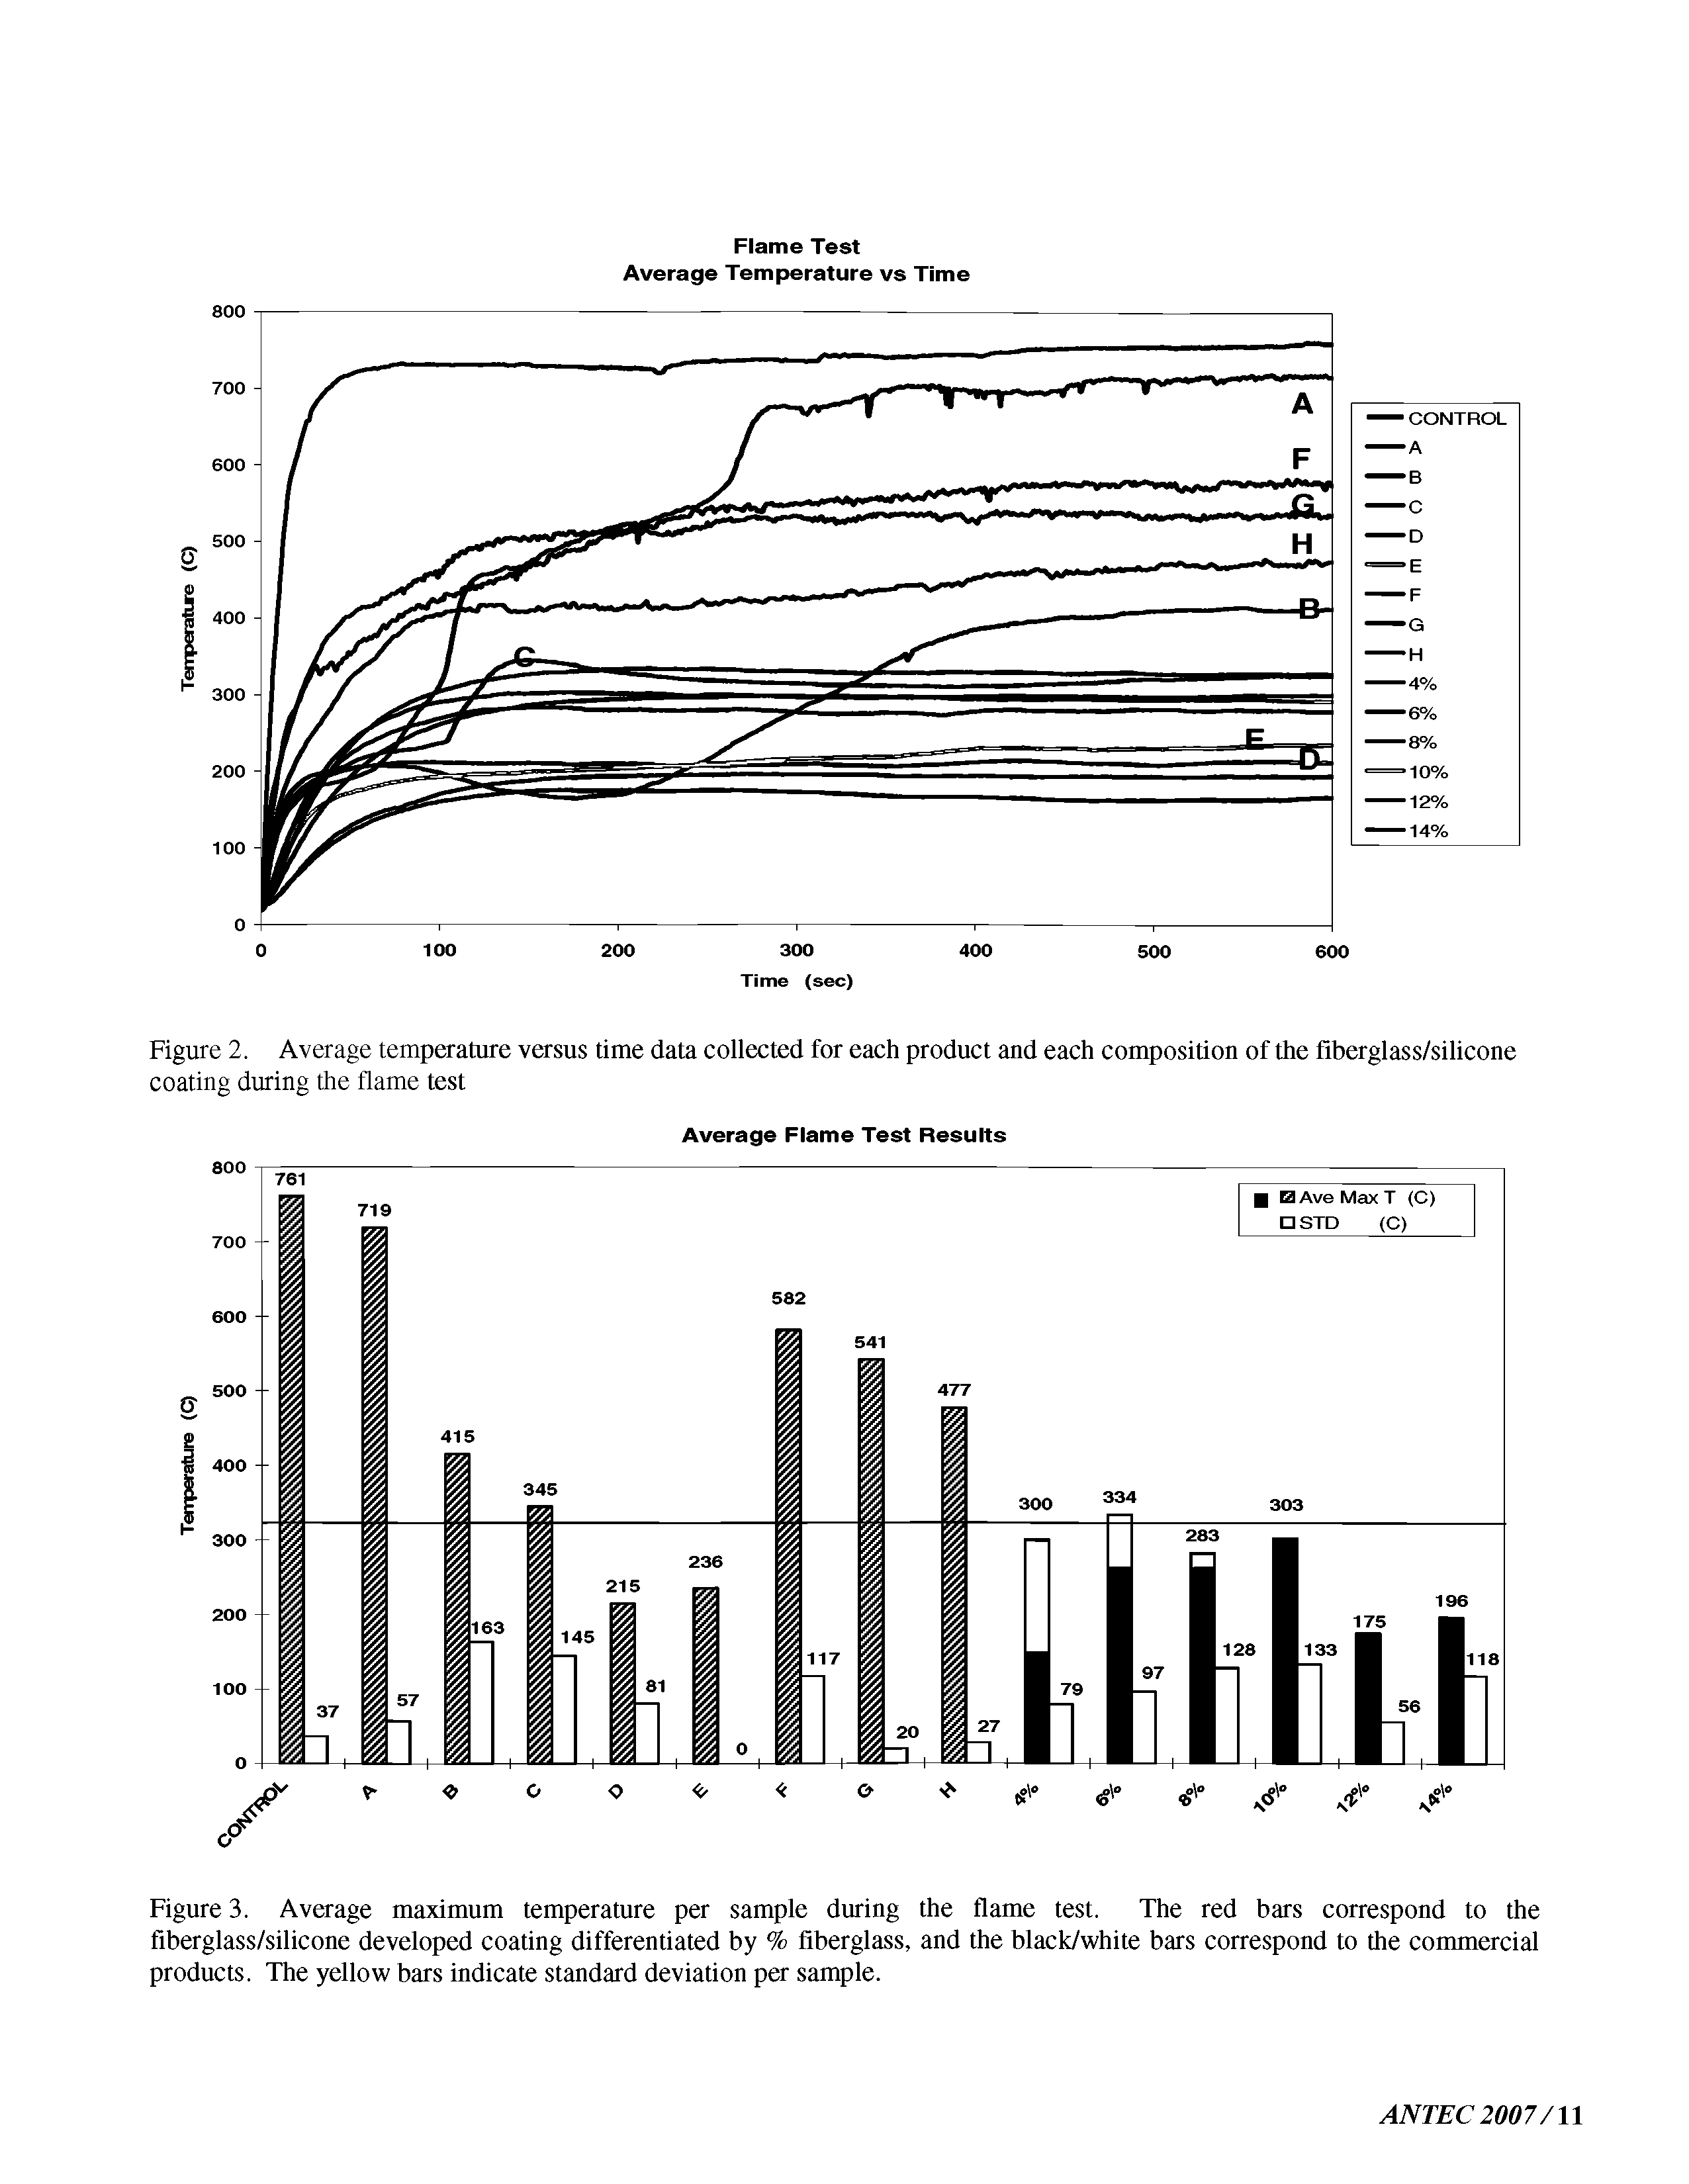 Figure 3. Average maximum temperature per sample during the flame test. The red bars correspond to the fiberglass/silicone developed coating differentiated by % fiberglass, and the black/white bars correspond to the commercial products. The yellow bars indicate standard deviation per sample.